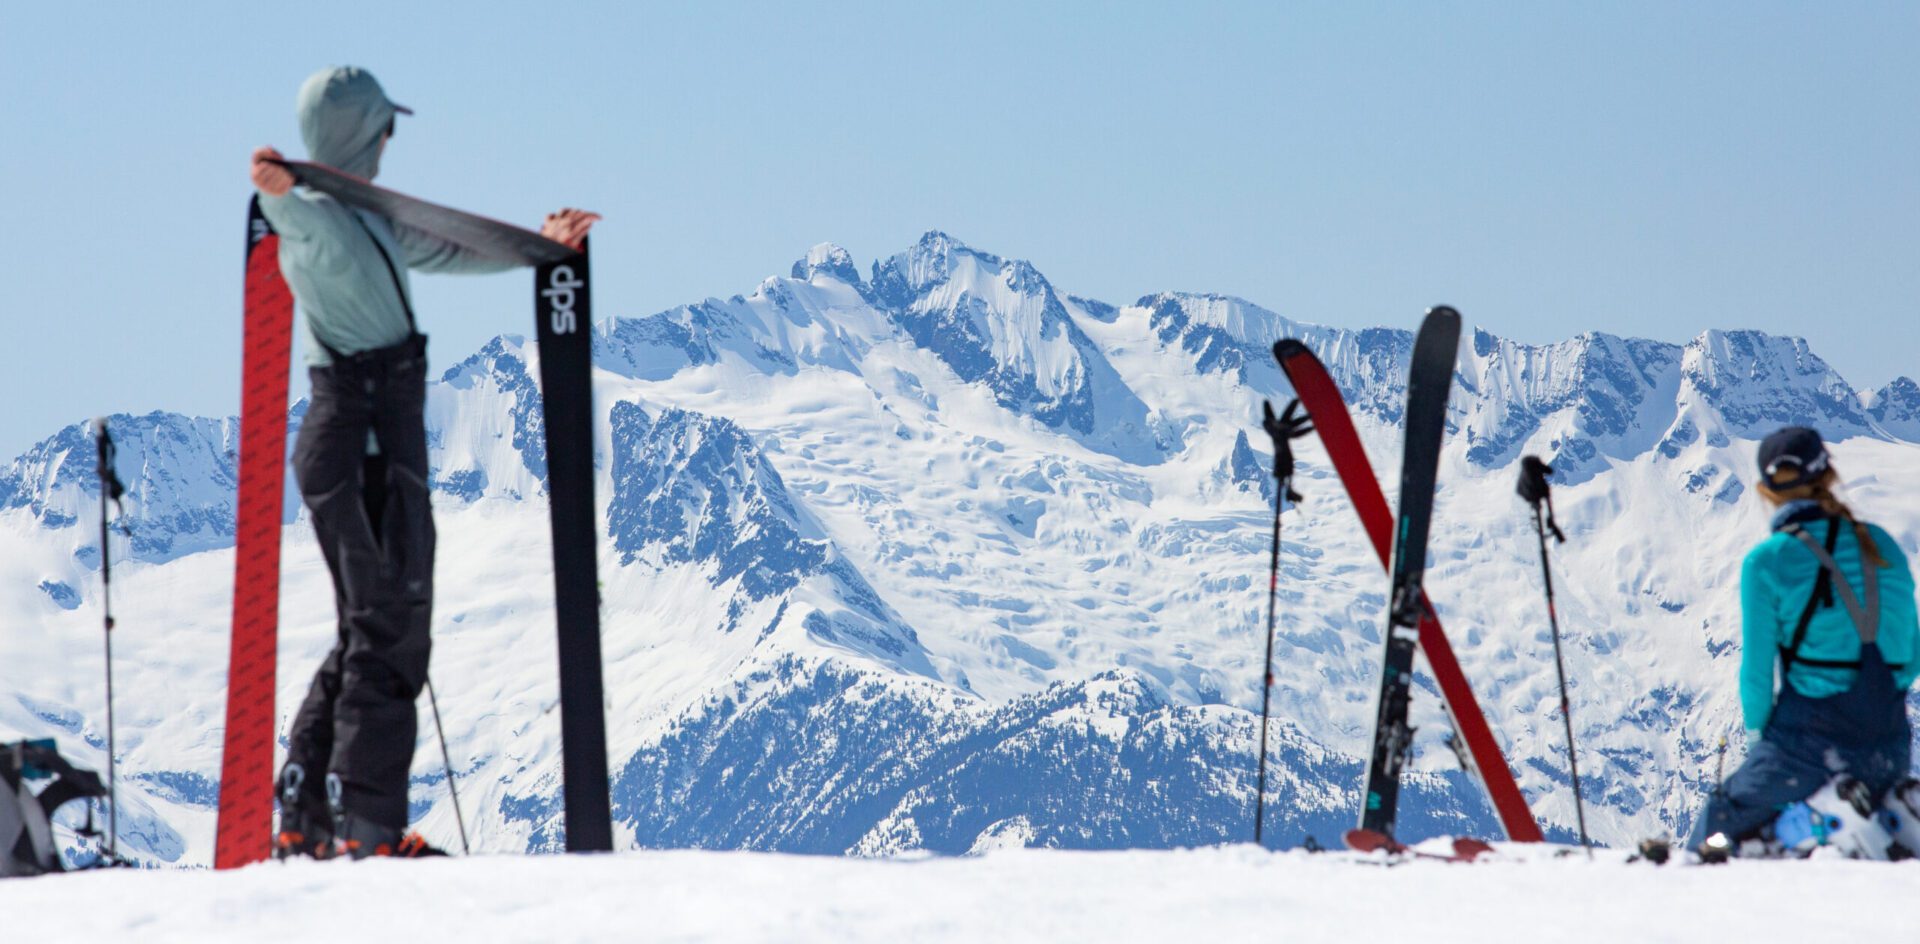 Ski gear essentials: our guide for first-time skiers - Maison Sport Blog